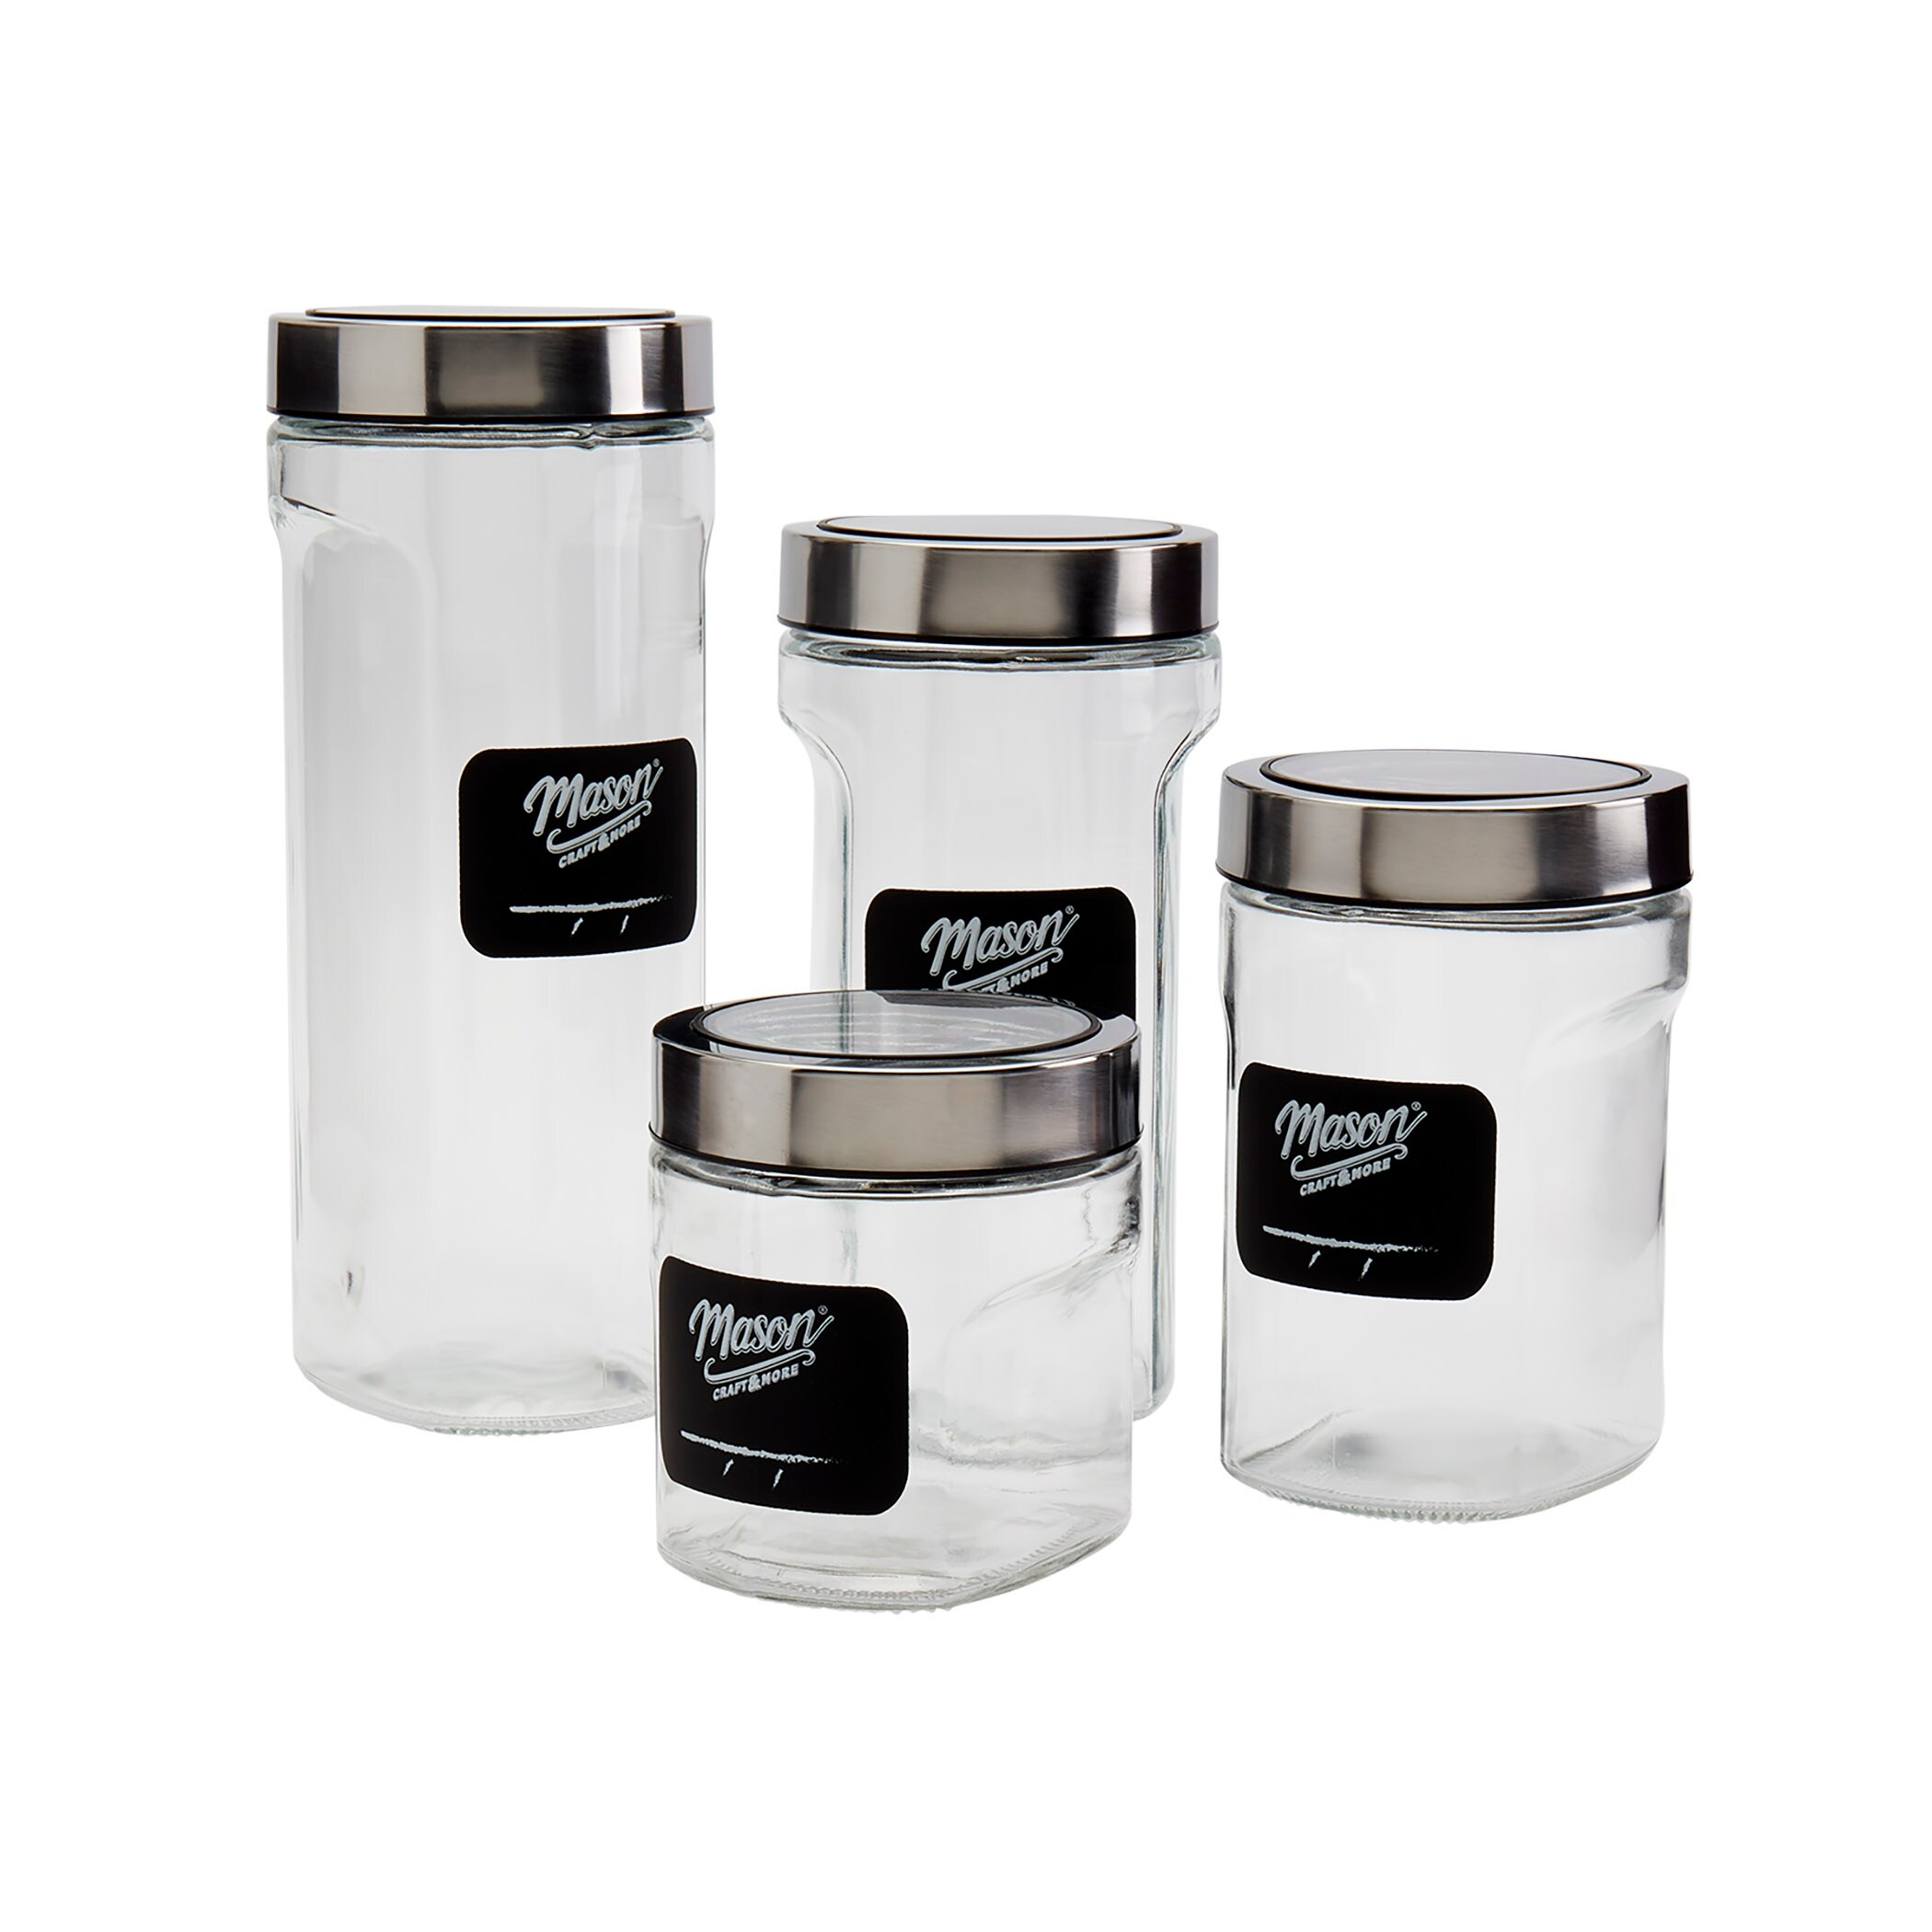 https://ak1.ostkcdn.com/images/products/is/images/direct/a6ca66bf4b2eecc088daa5cf71accc7067149b92/Mason-Craft-%26-More-8PC-Clear-Glass-Canister-w--Chalk-Board-%26-Stainless-Steel-Lids.jpg